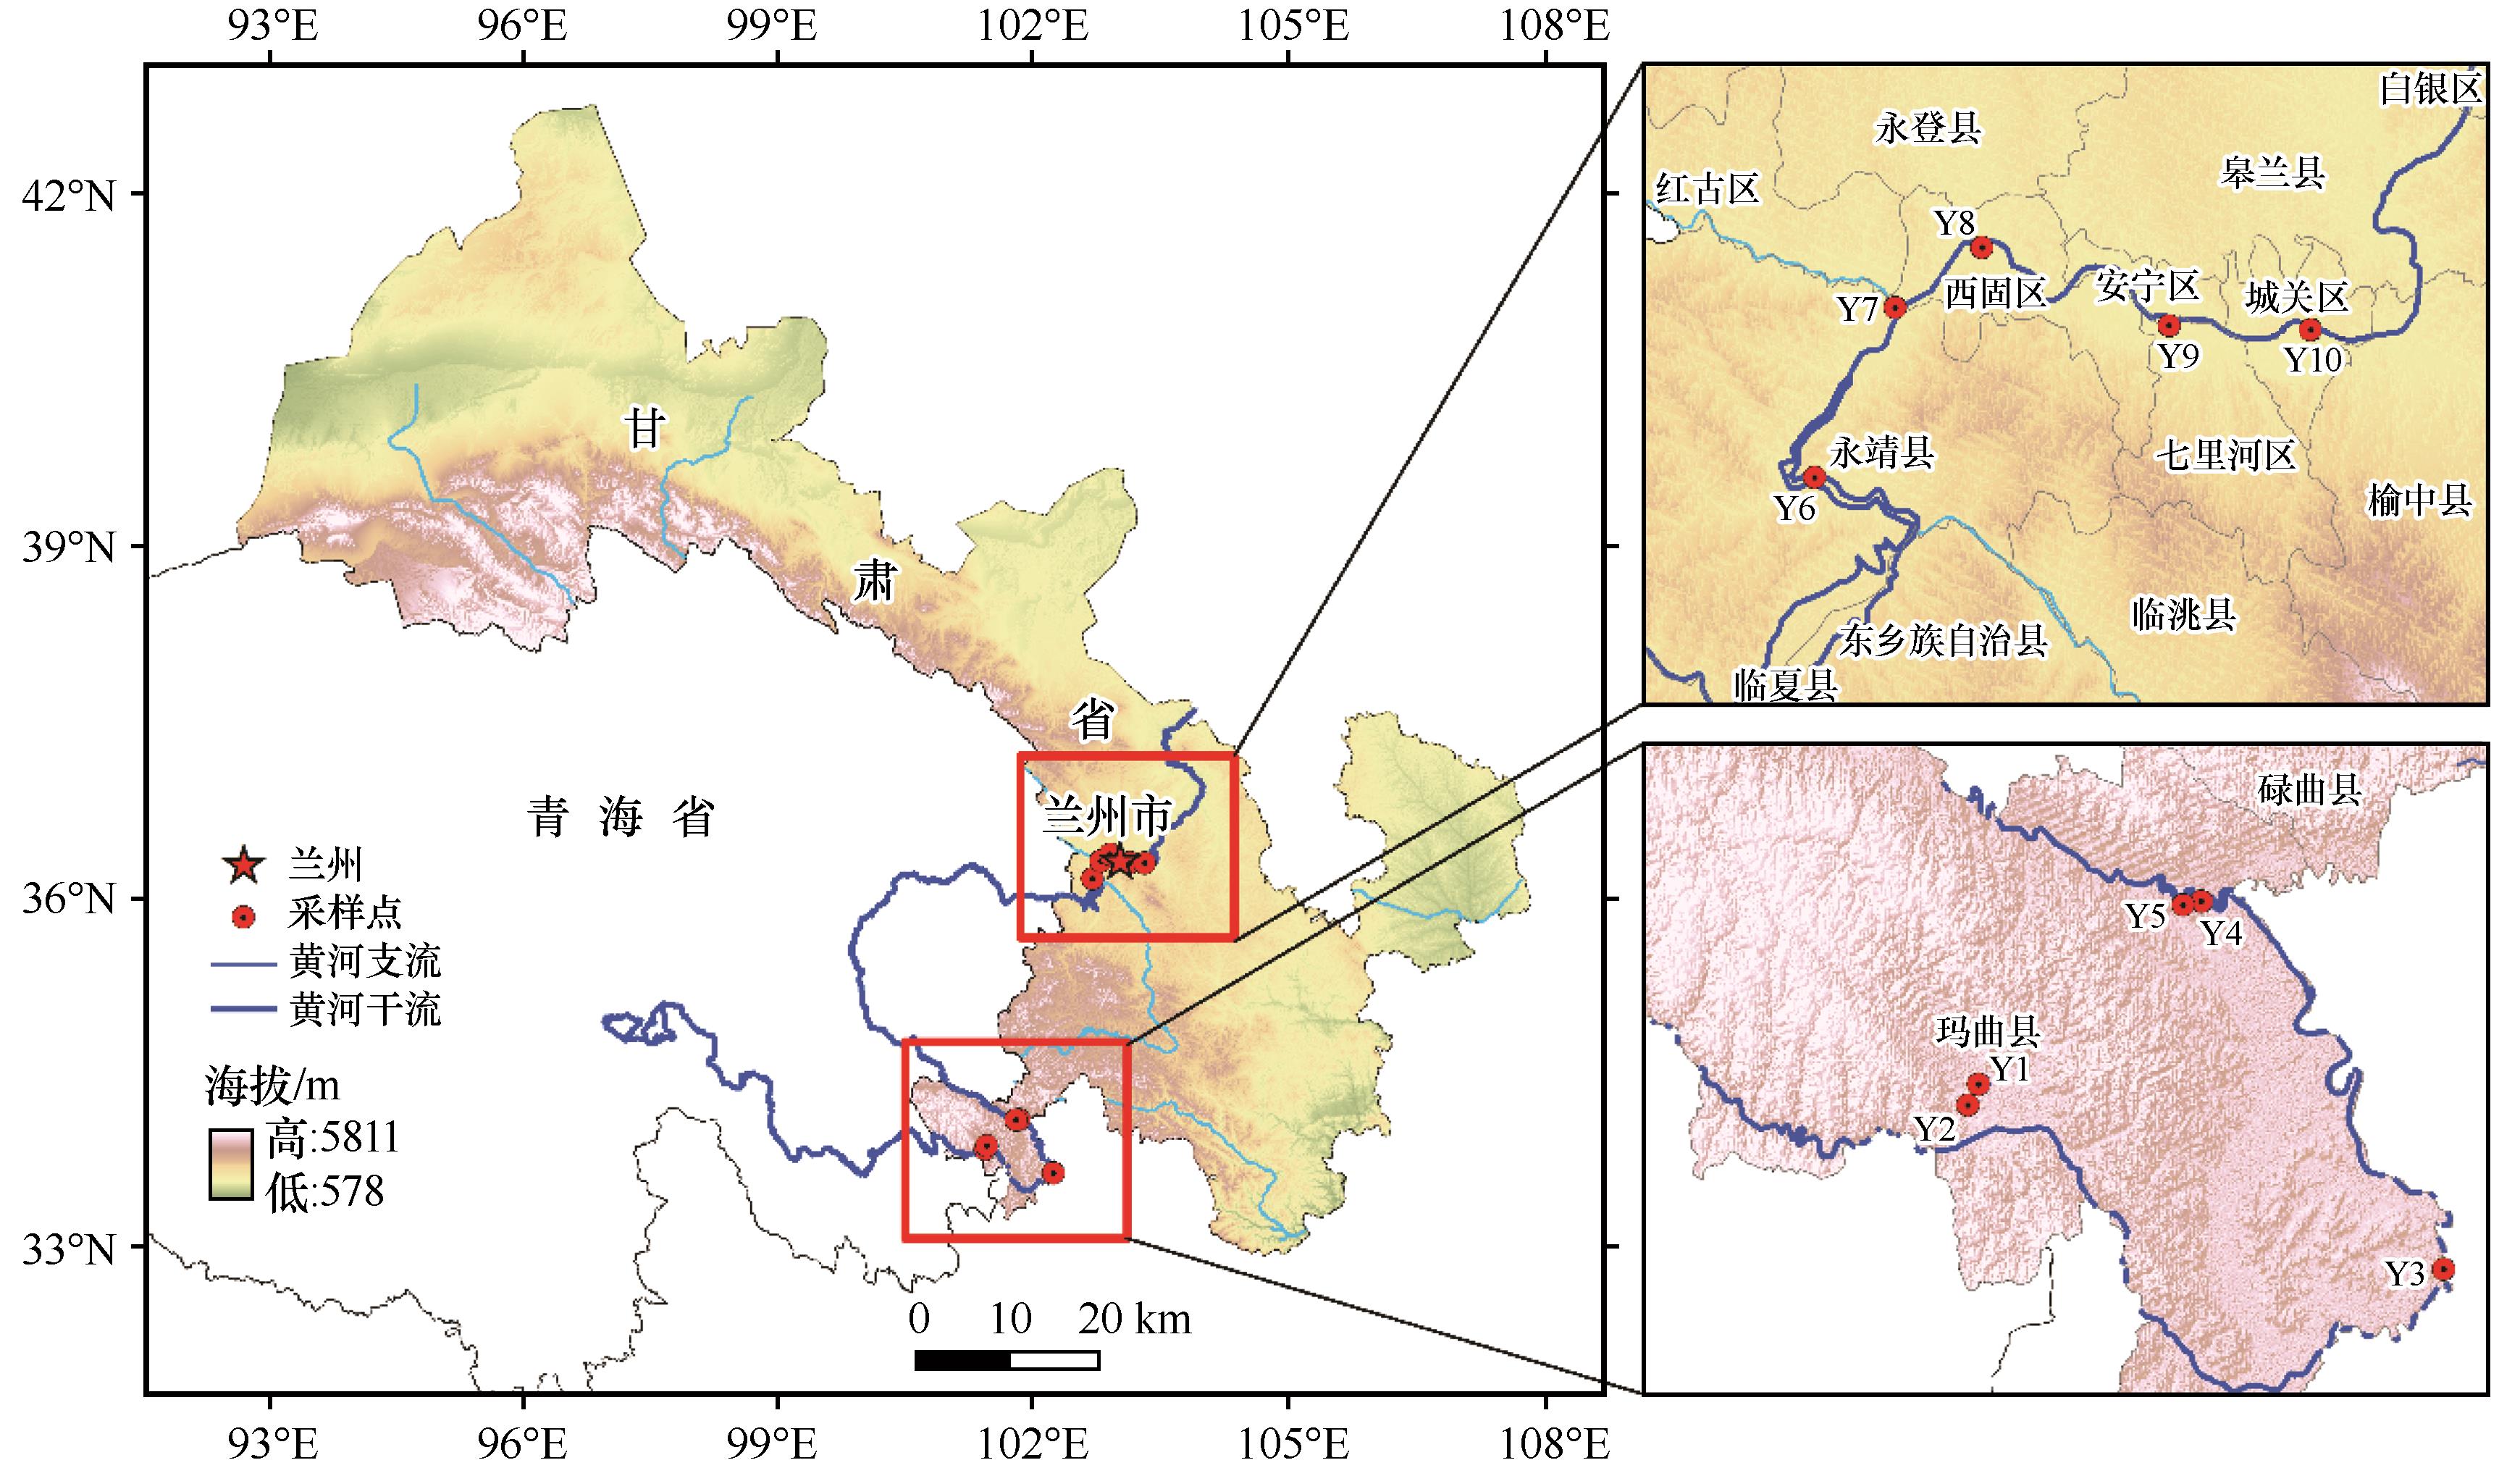 Macrobenthos community structure and water quality evaluation in Gansu section of Yellow River Basin